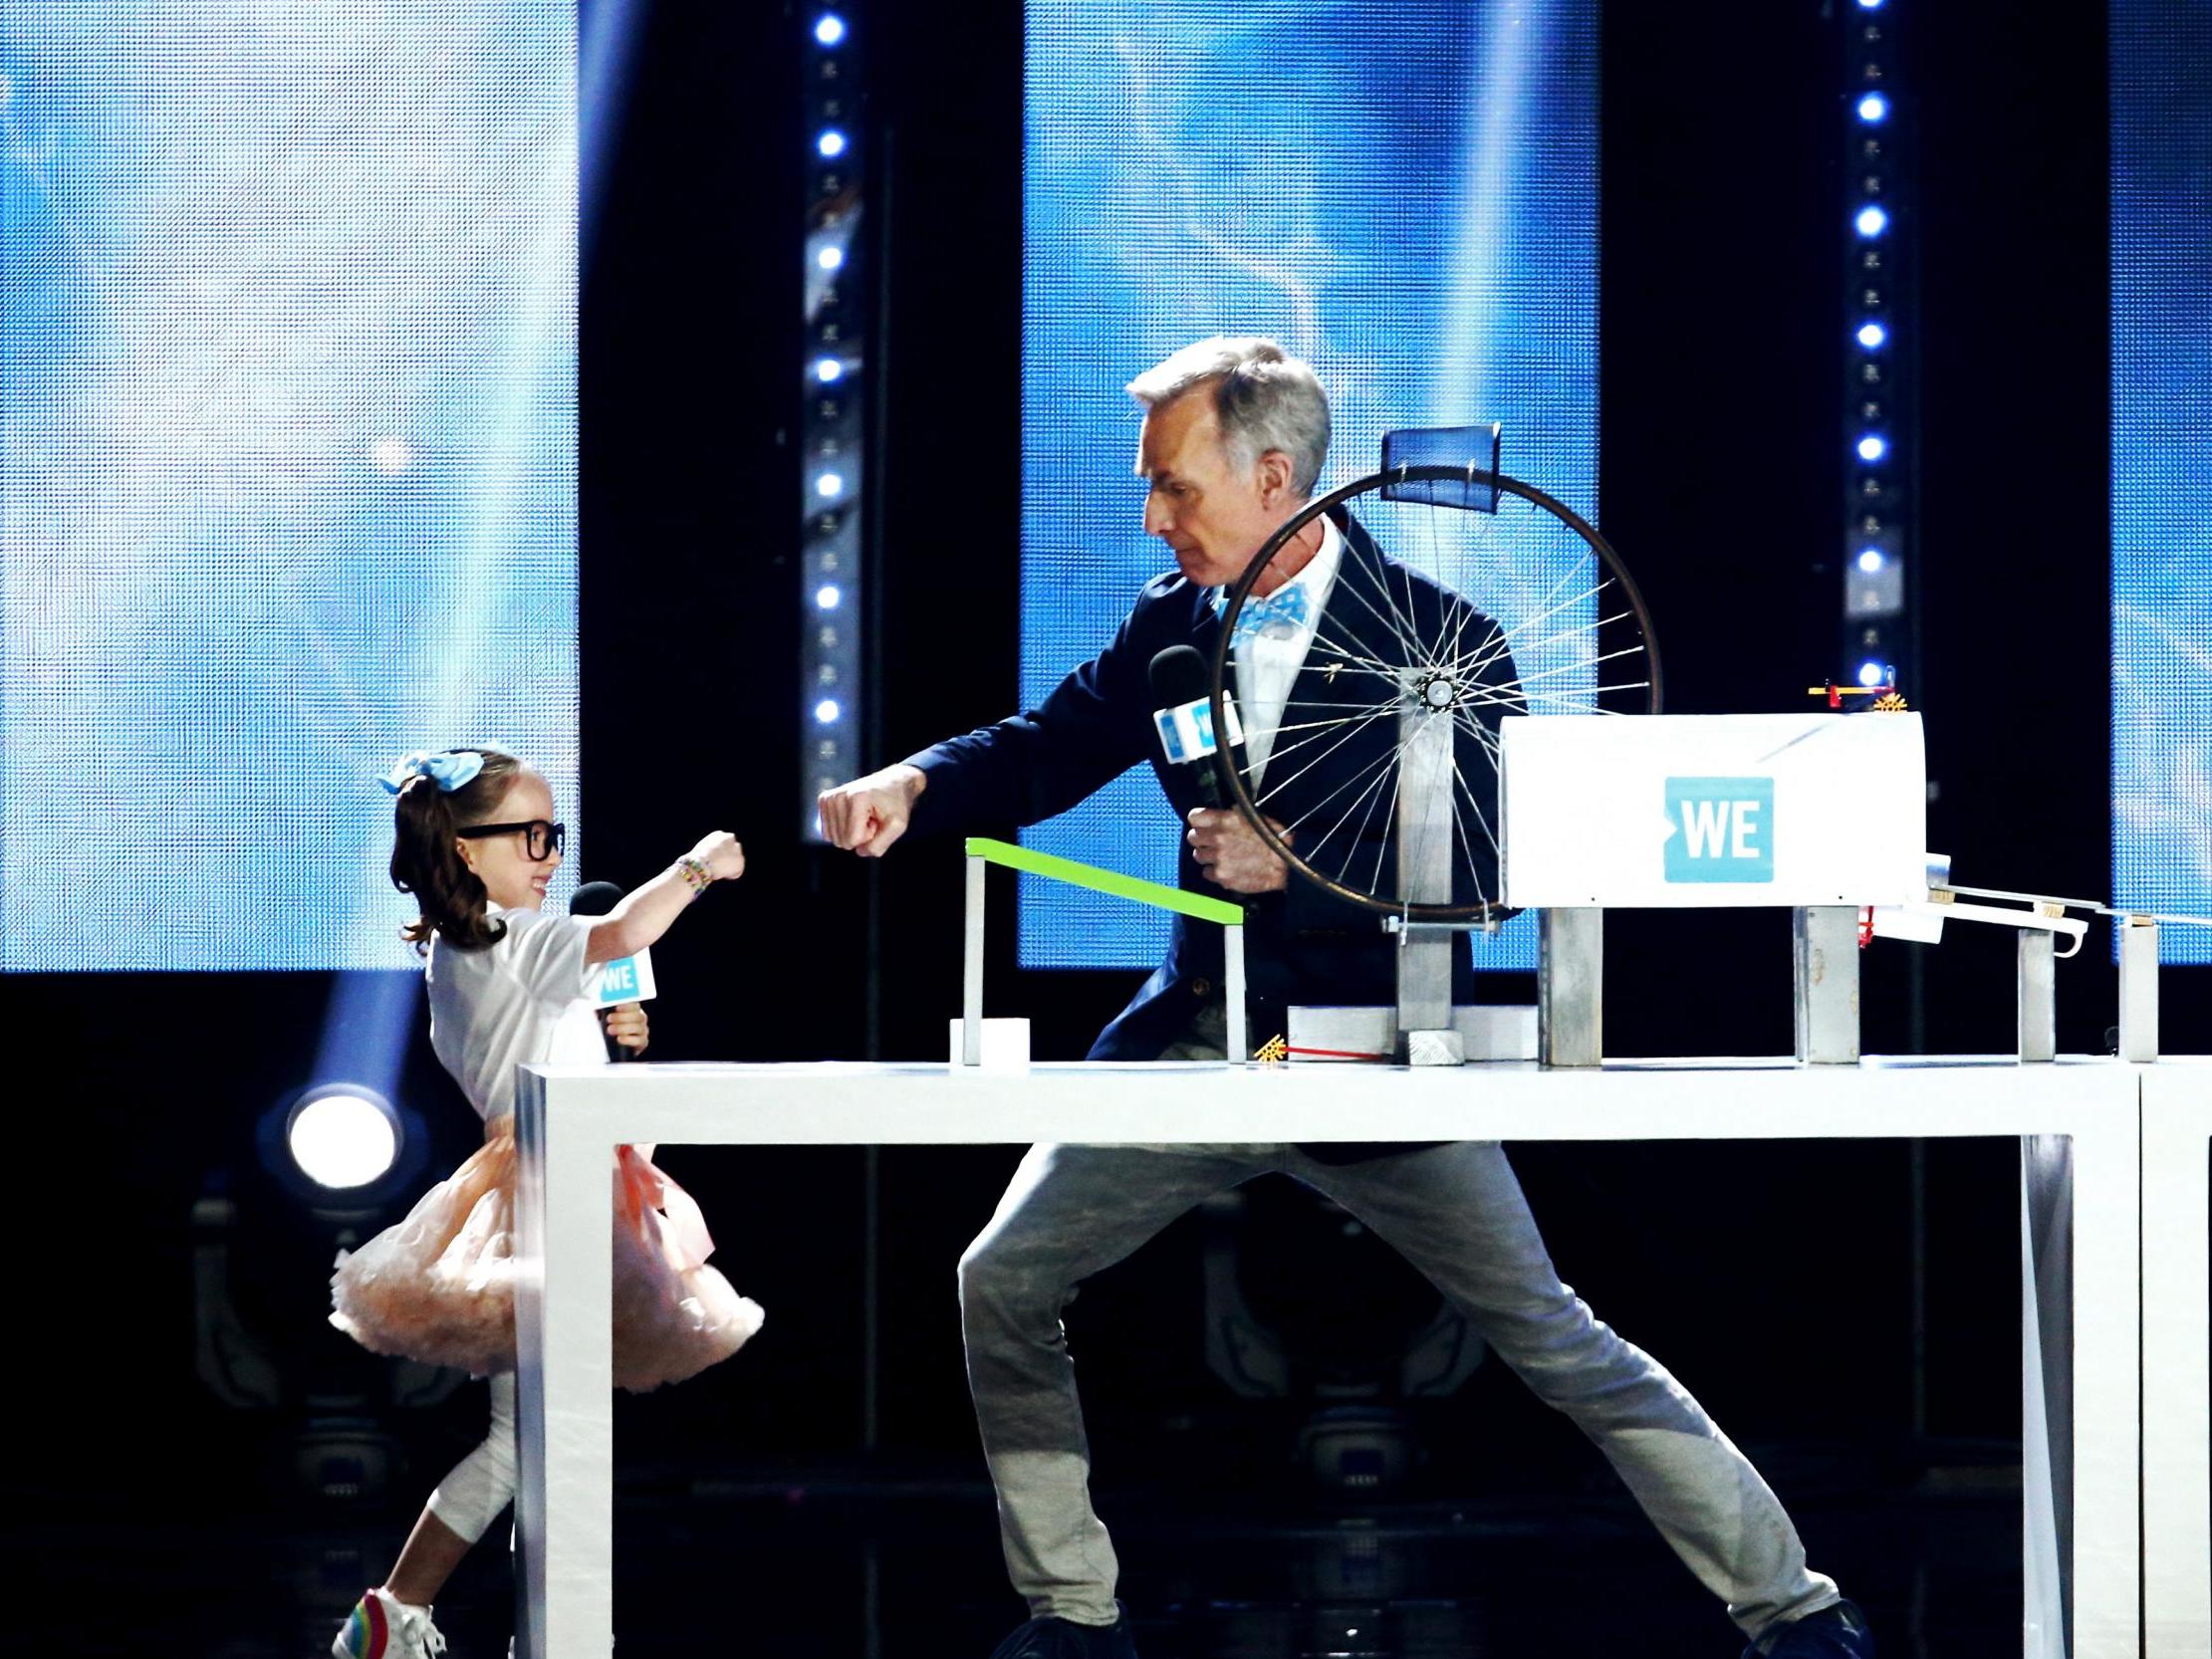 Bill Nye (right) and Brielle Milla (left) speak onstage at WE Day California at The Forum on April 25, 2019 in Inglewood, California.